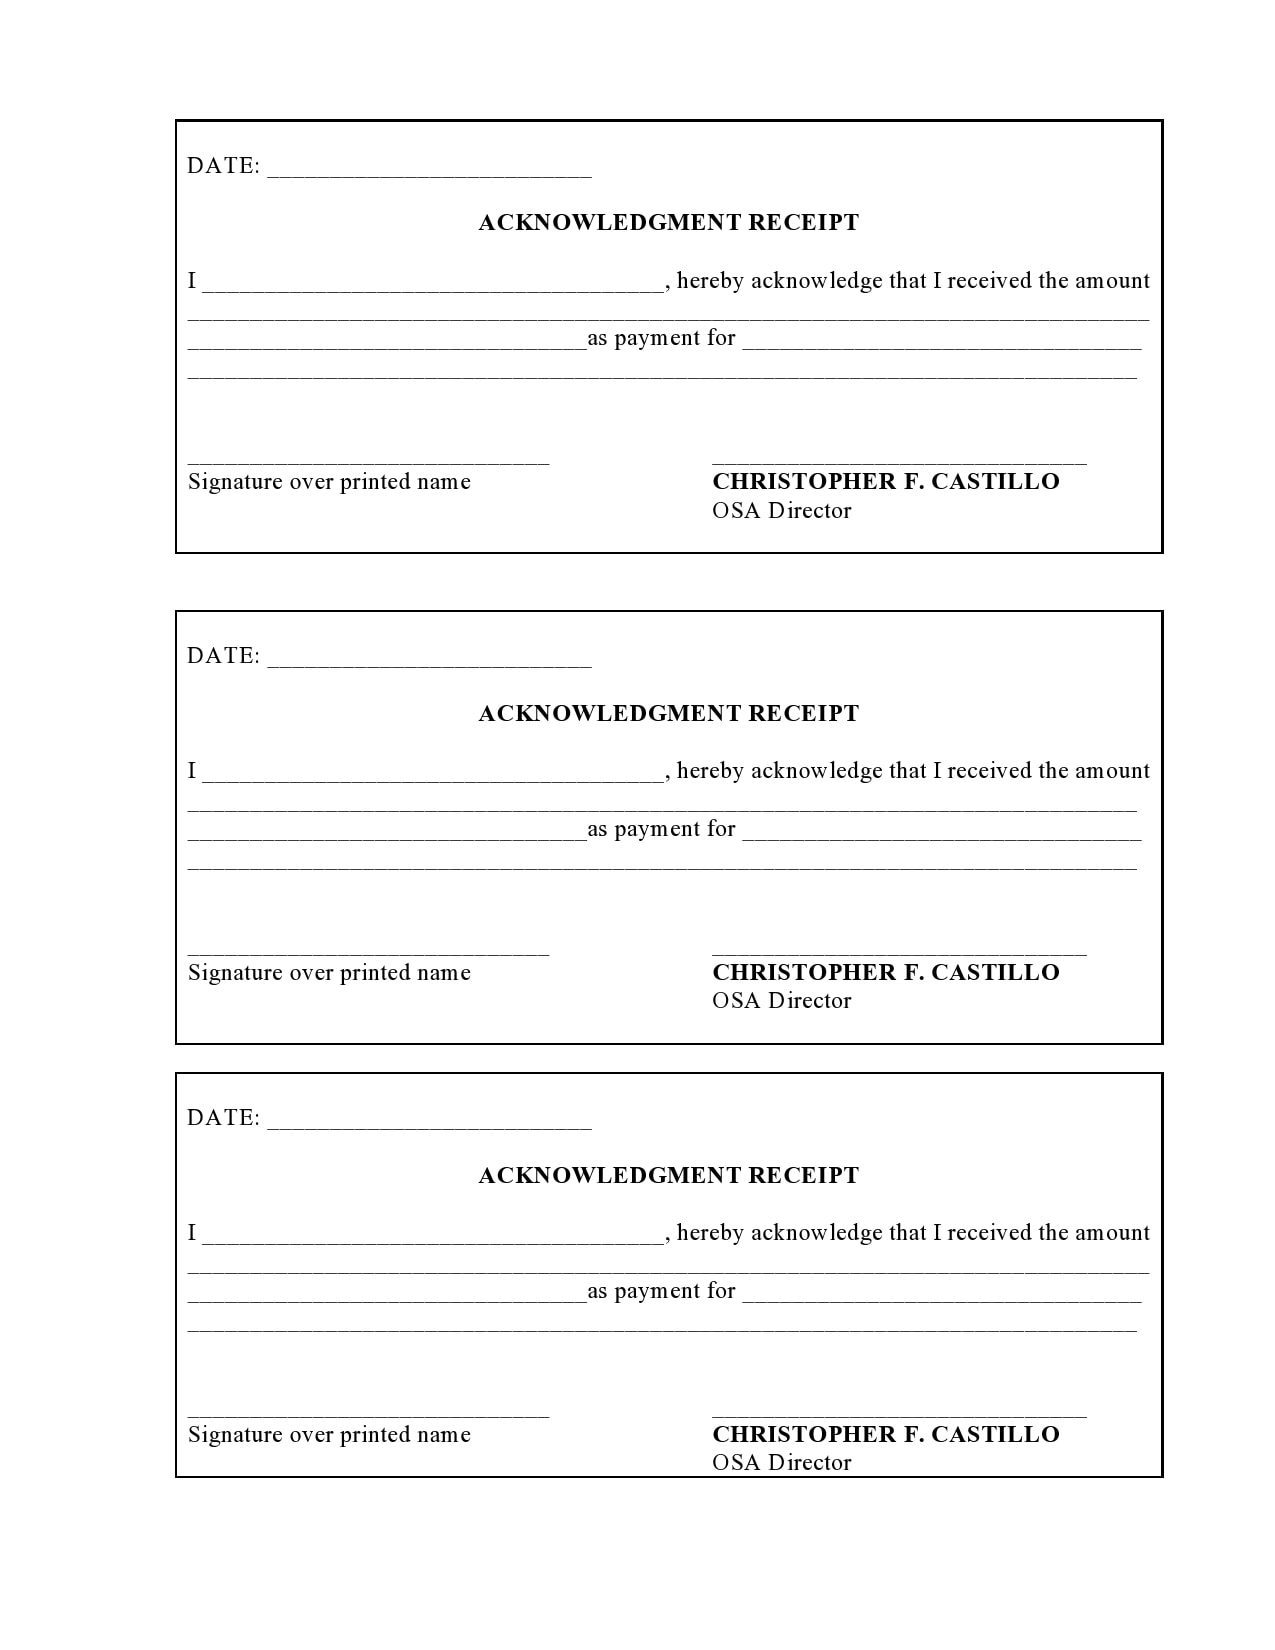 Buyers Hoa Receipt And Acknowledgement Template Glamorous Receipt Forms